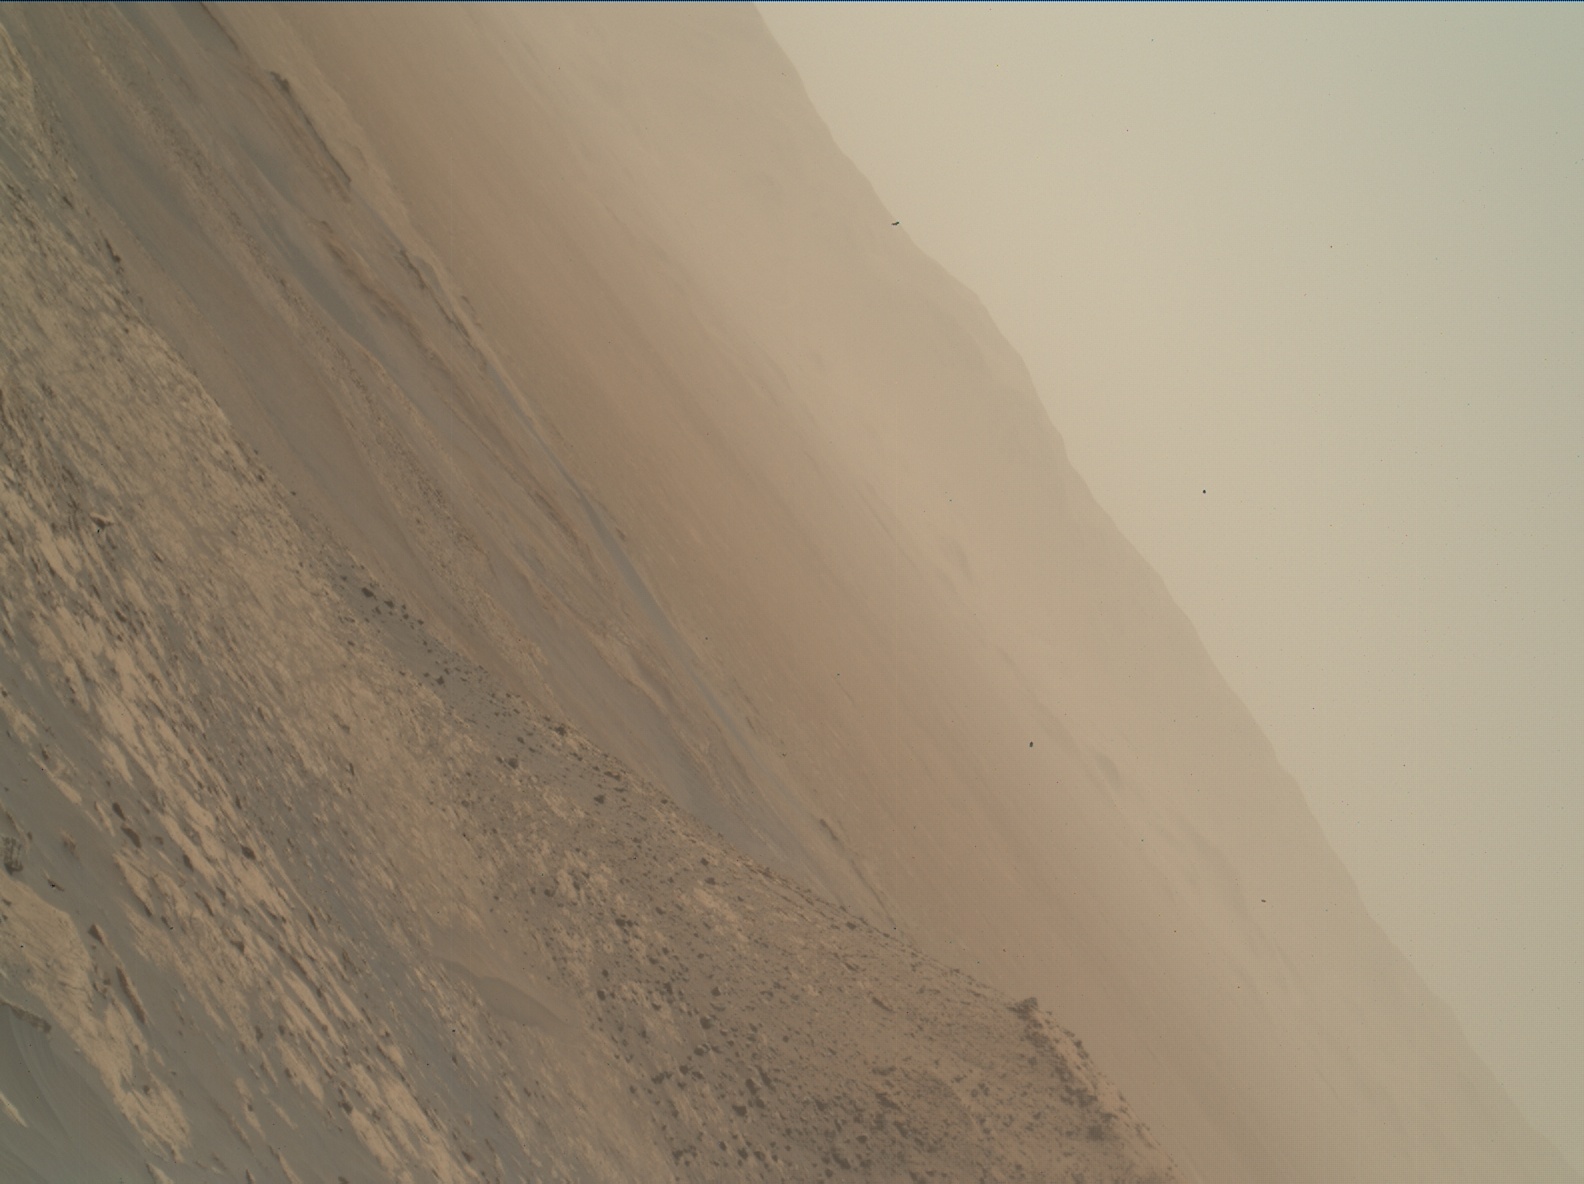 Nasa's Mars rover Curiosity acquired this image using its Mars Hand Lens Imager (MAHLI) on Sol 2687